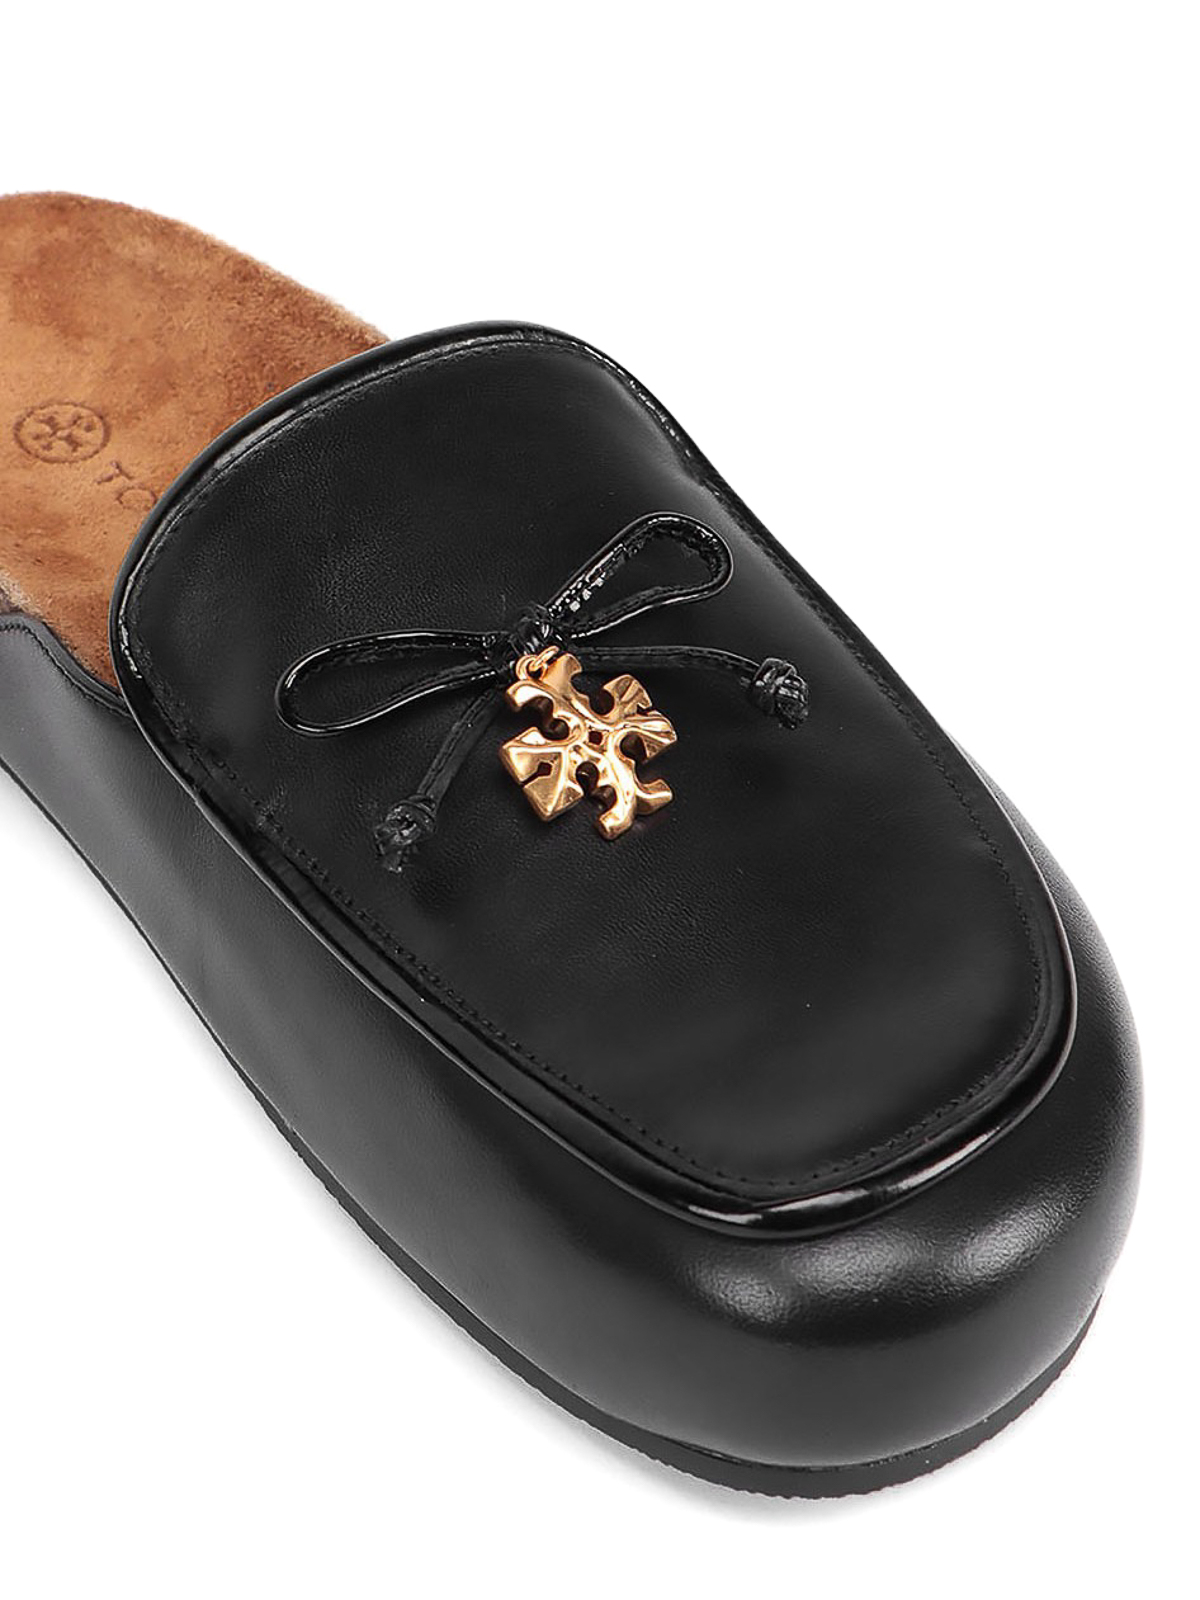 Mules shoes Tory Burch - Charm mules - 85402004 | Shop online at iKRIX